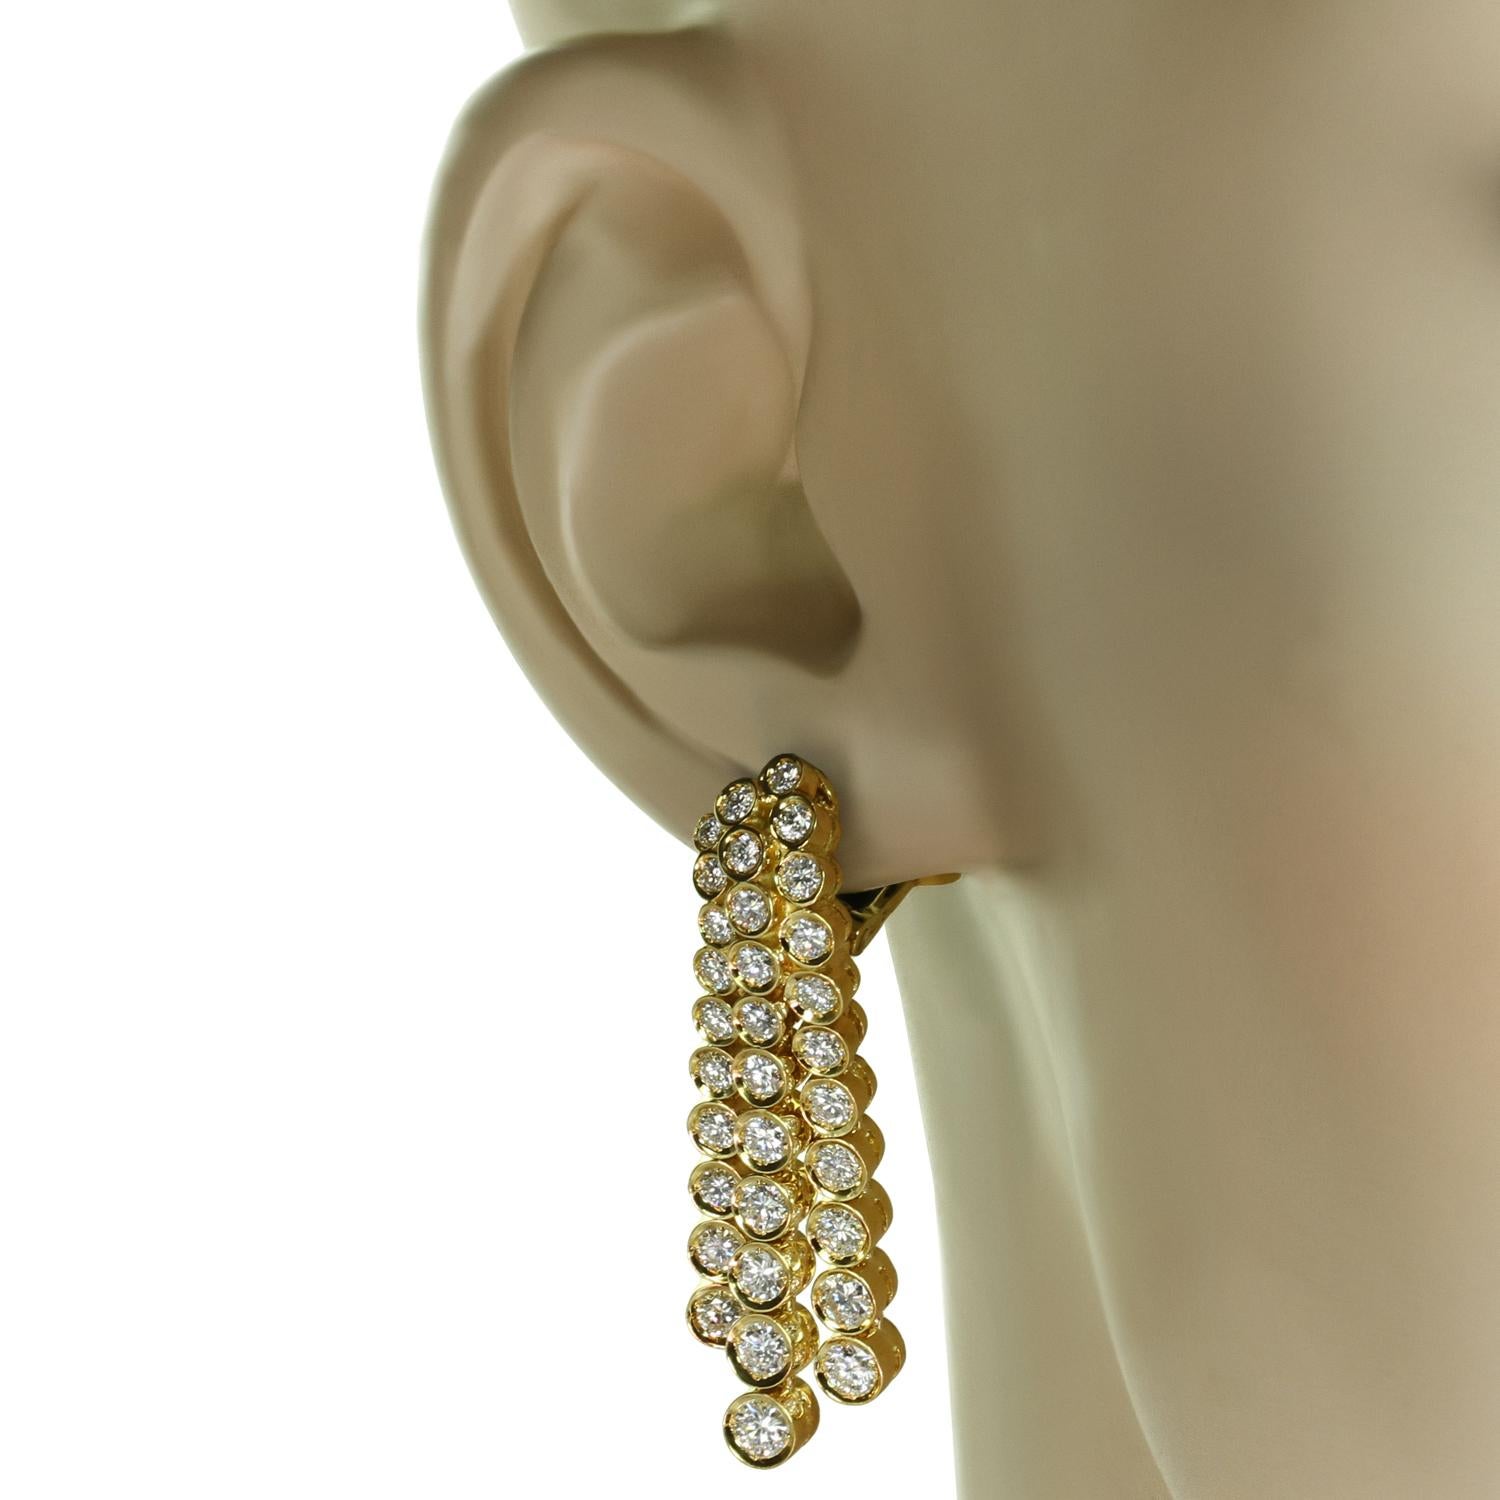 These gorgeous Fred Paris clip-on earrings feature a cascade chandelier design crafted in 18k yellow gold and set with round brilliant E-F-G VVS2-VS1 diamonds weighing an estimated 4.50 - 5.0 carats. Made in France circa 1980s. Measurements: 1.41